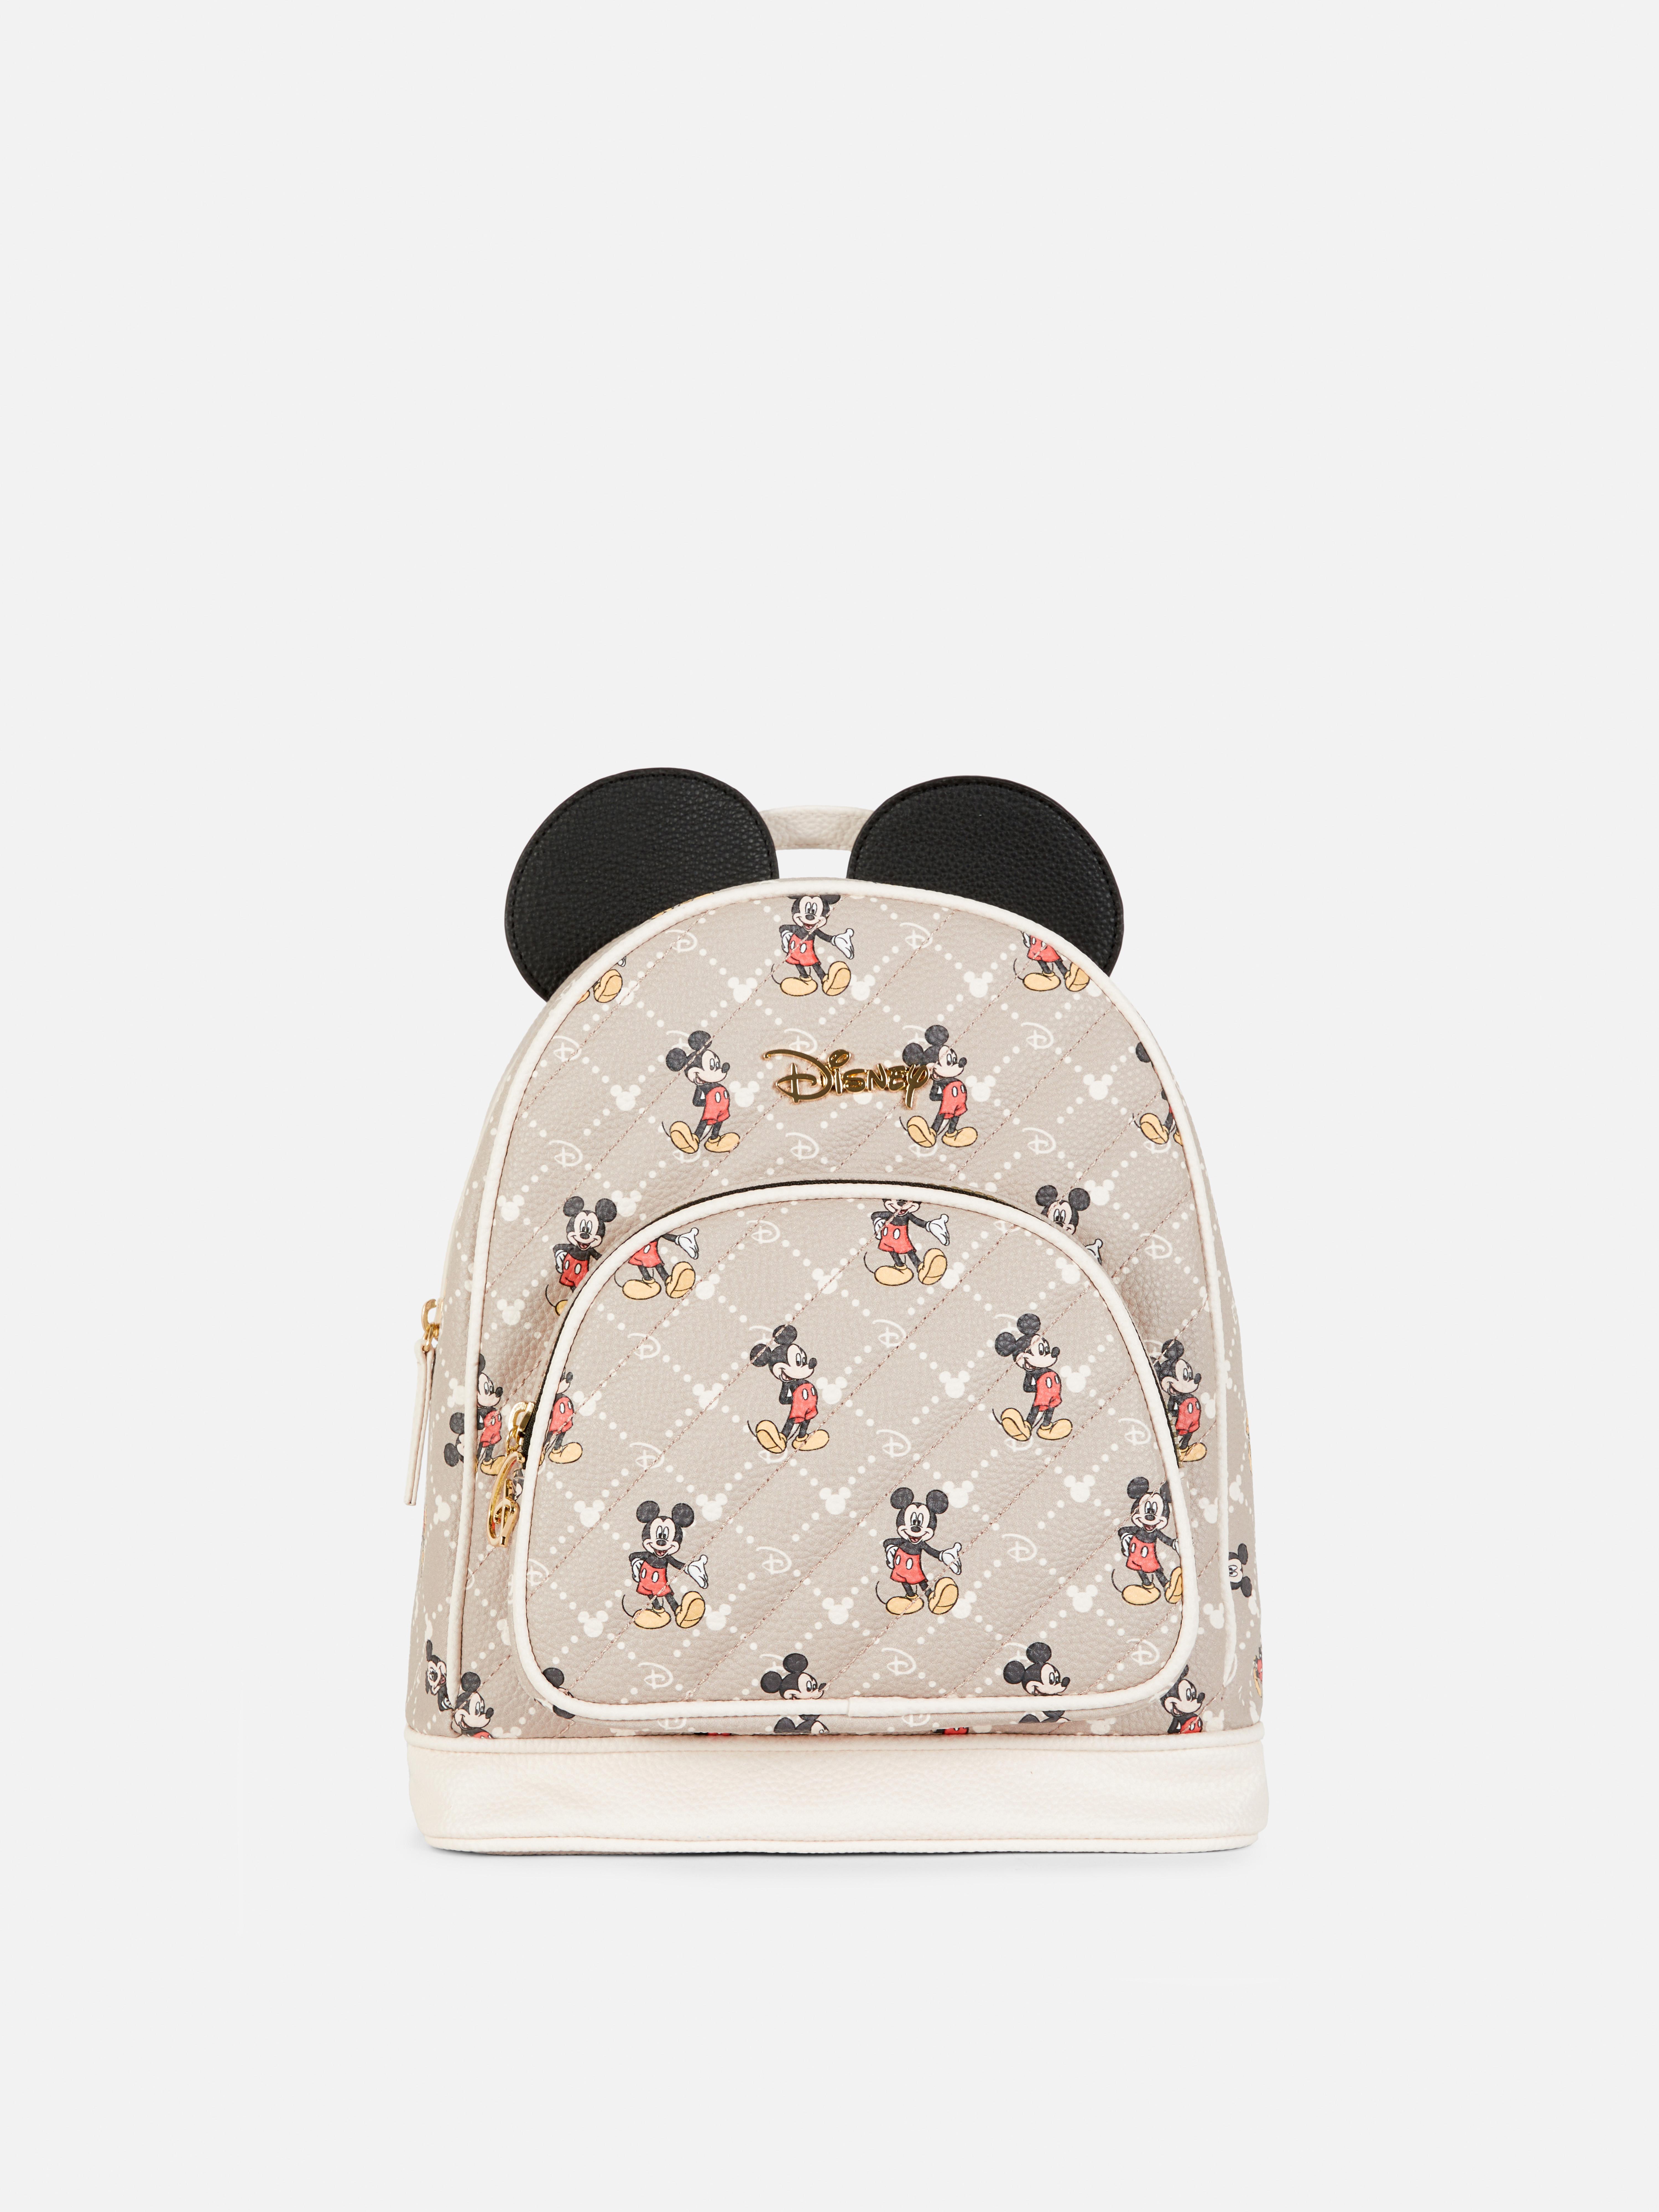 Disney’s Mickey Mouse Monogram Backpack